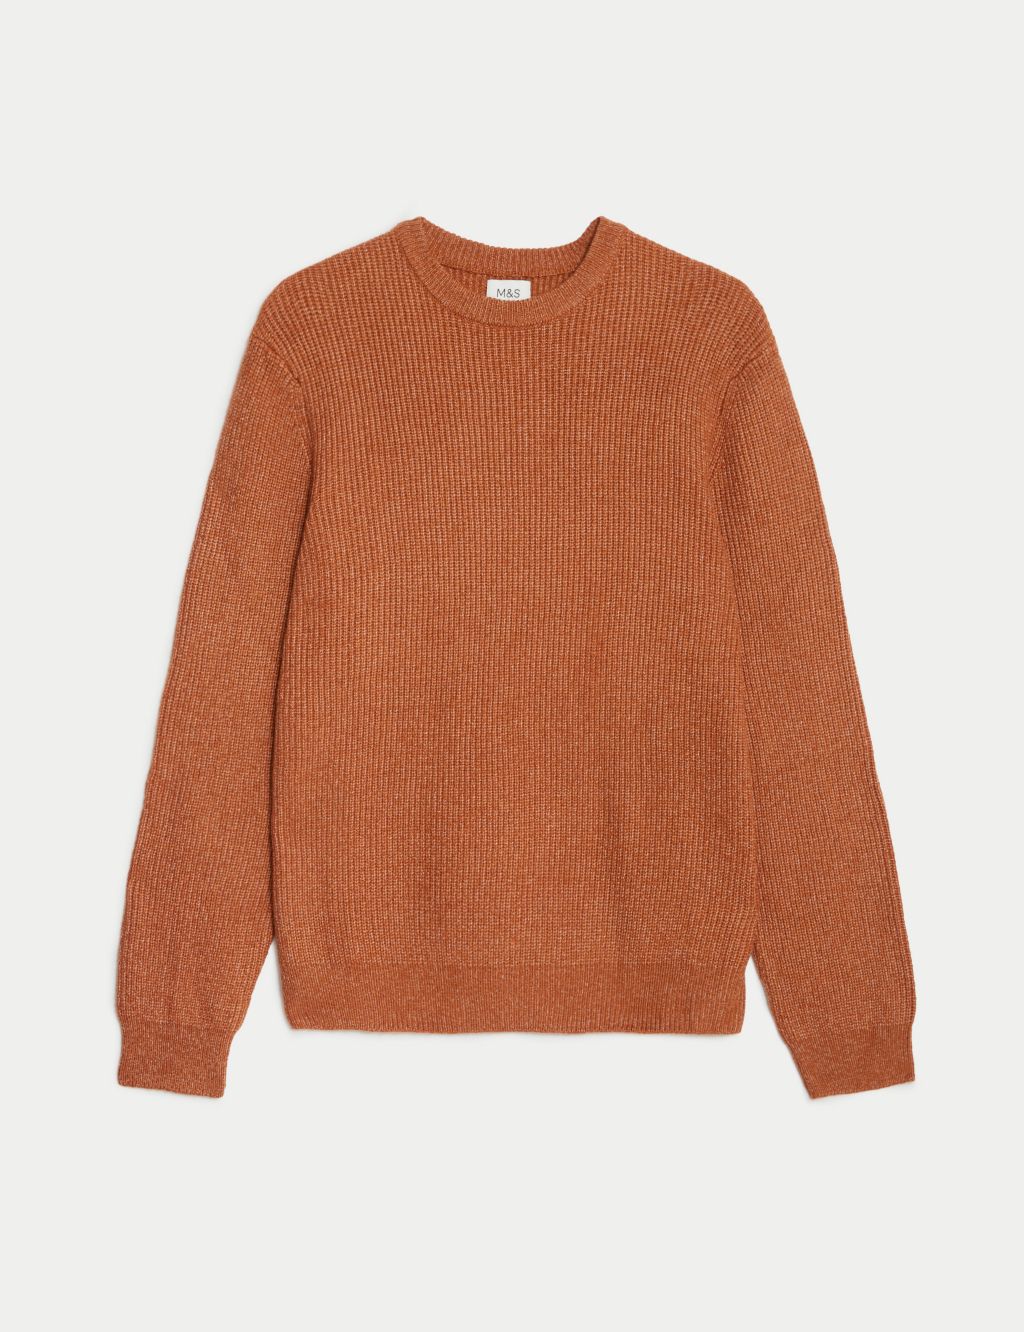 Supersoft Chunky Crew Neck Jumper image 2